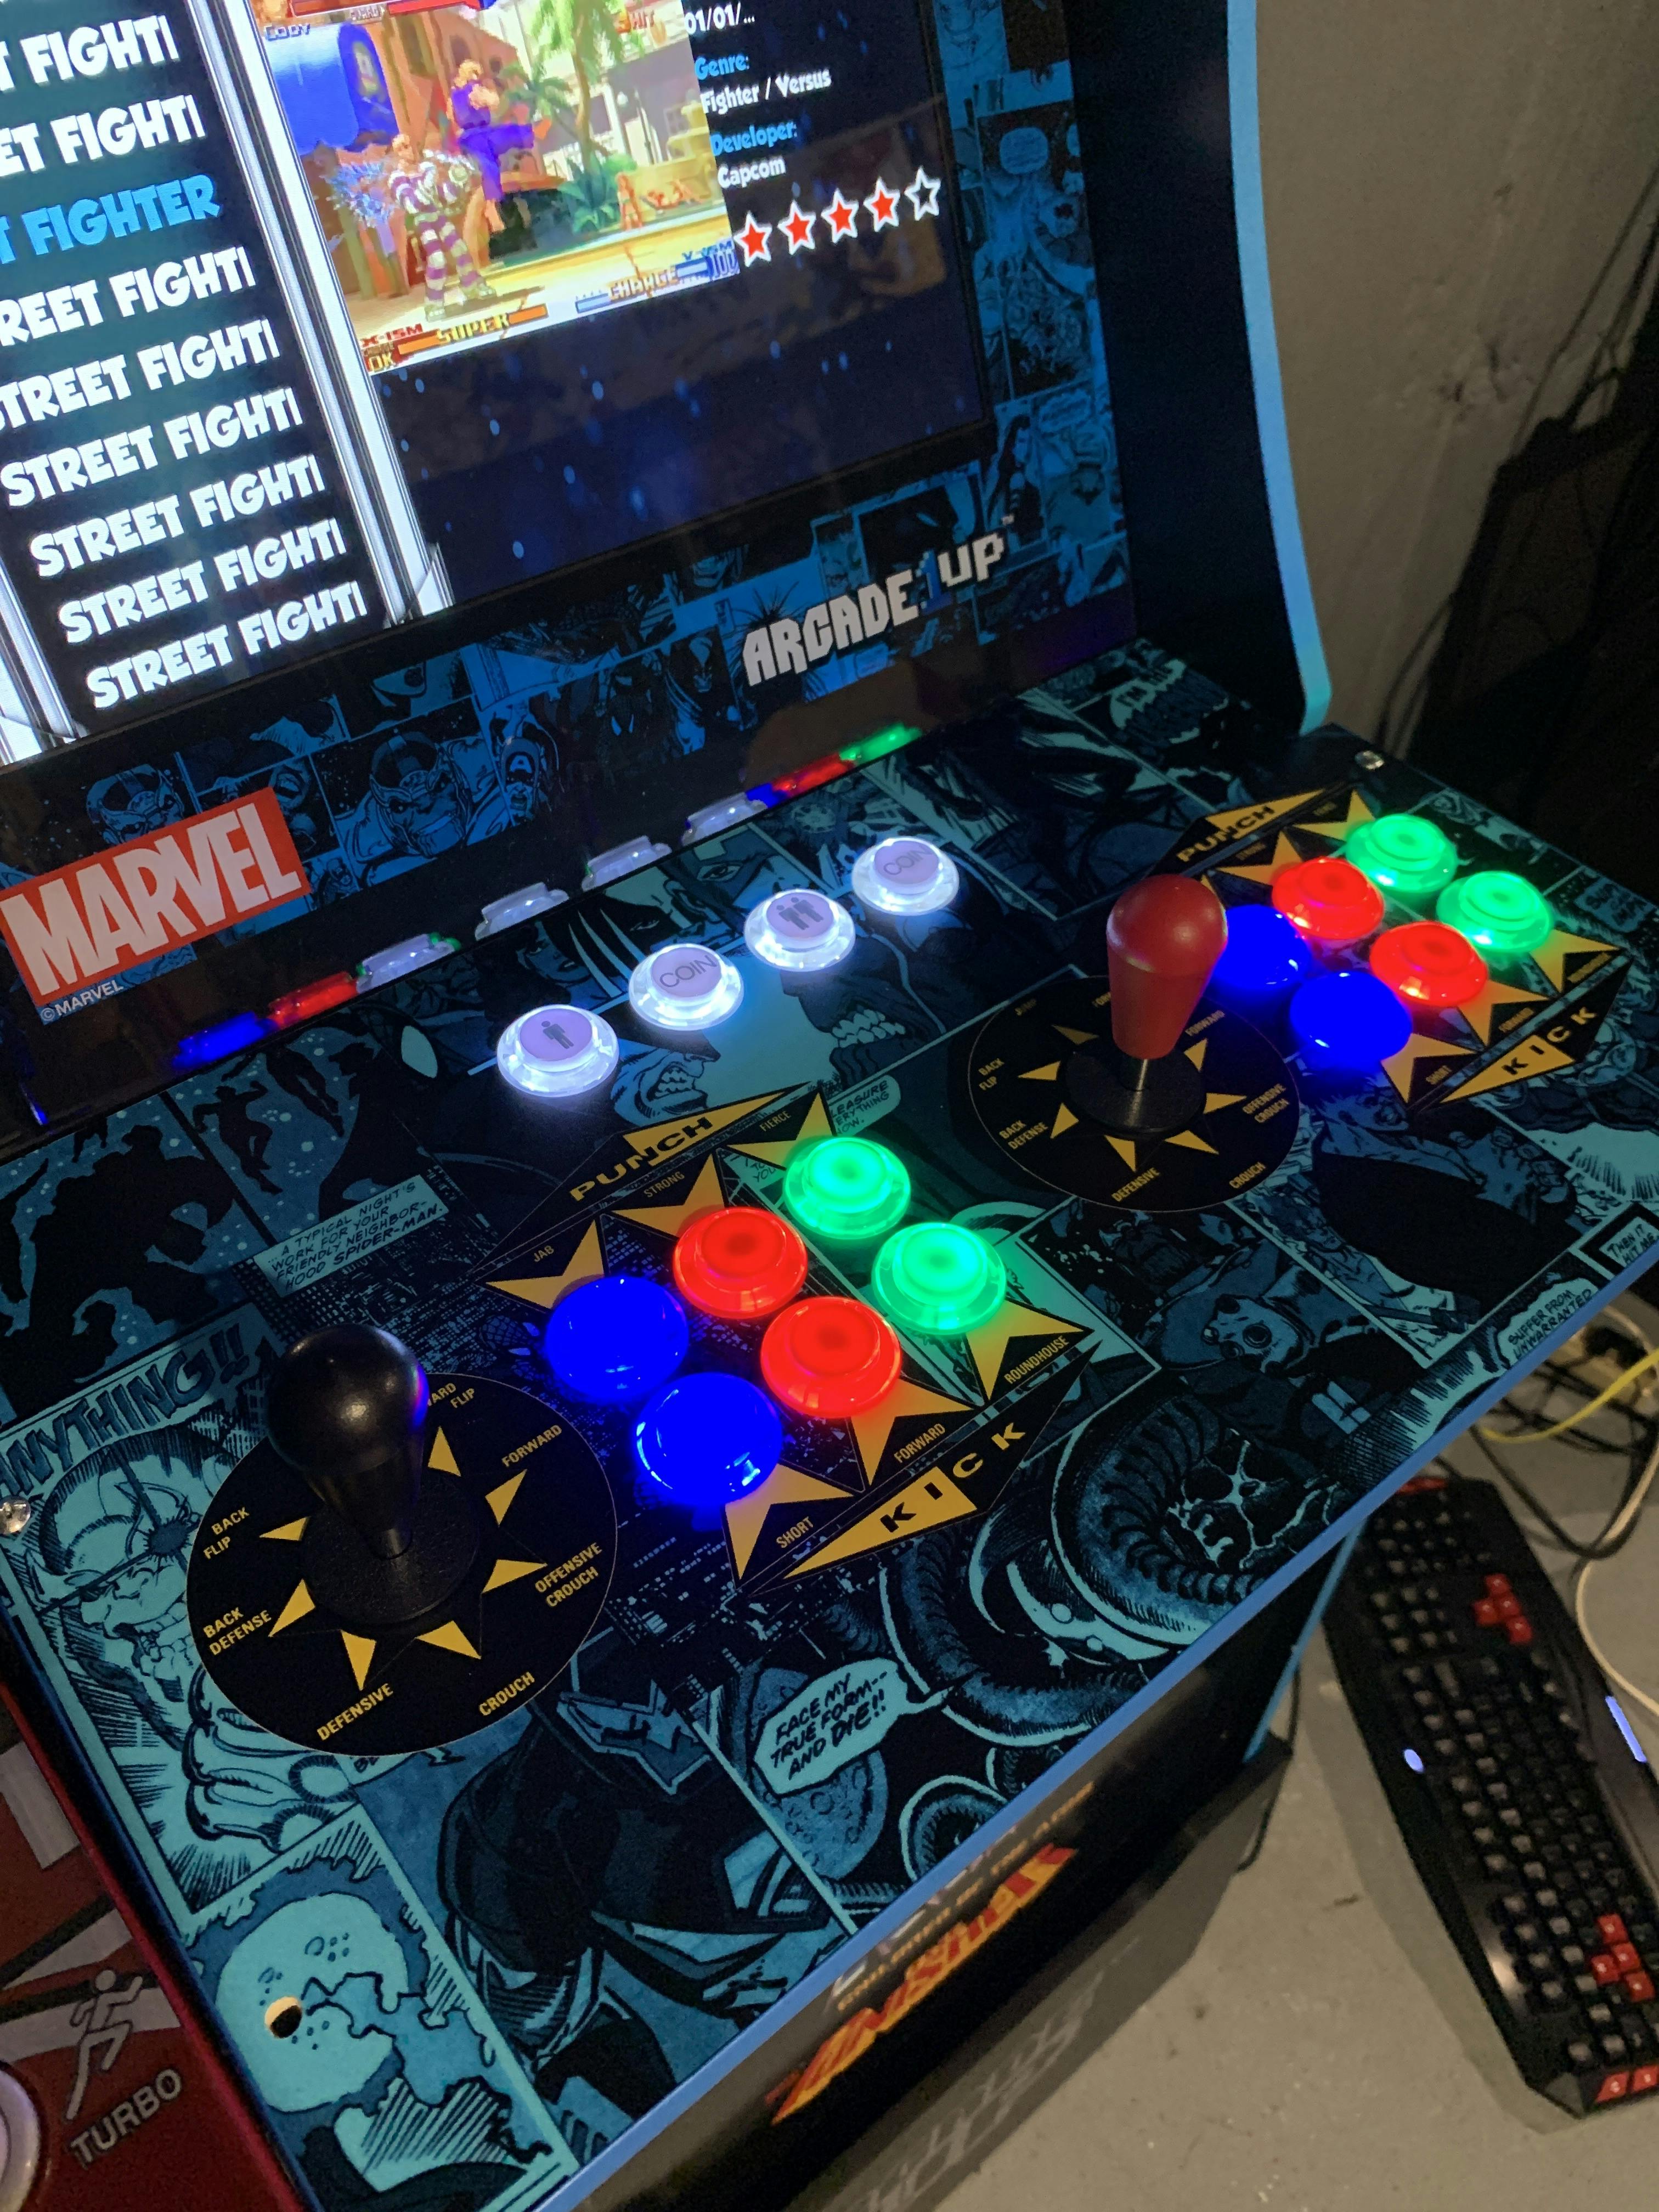 Marvel Super Heroes Upright Arcade Game Control Panel Overlay 